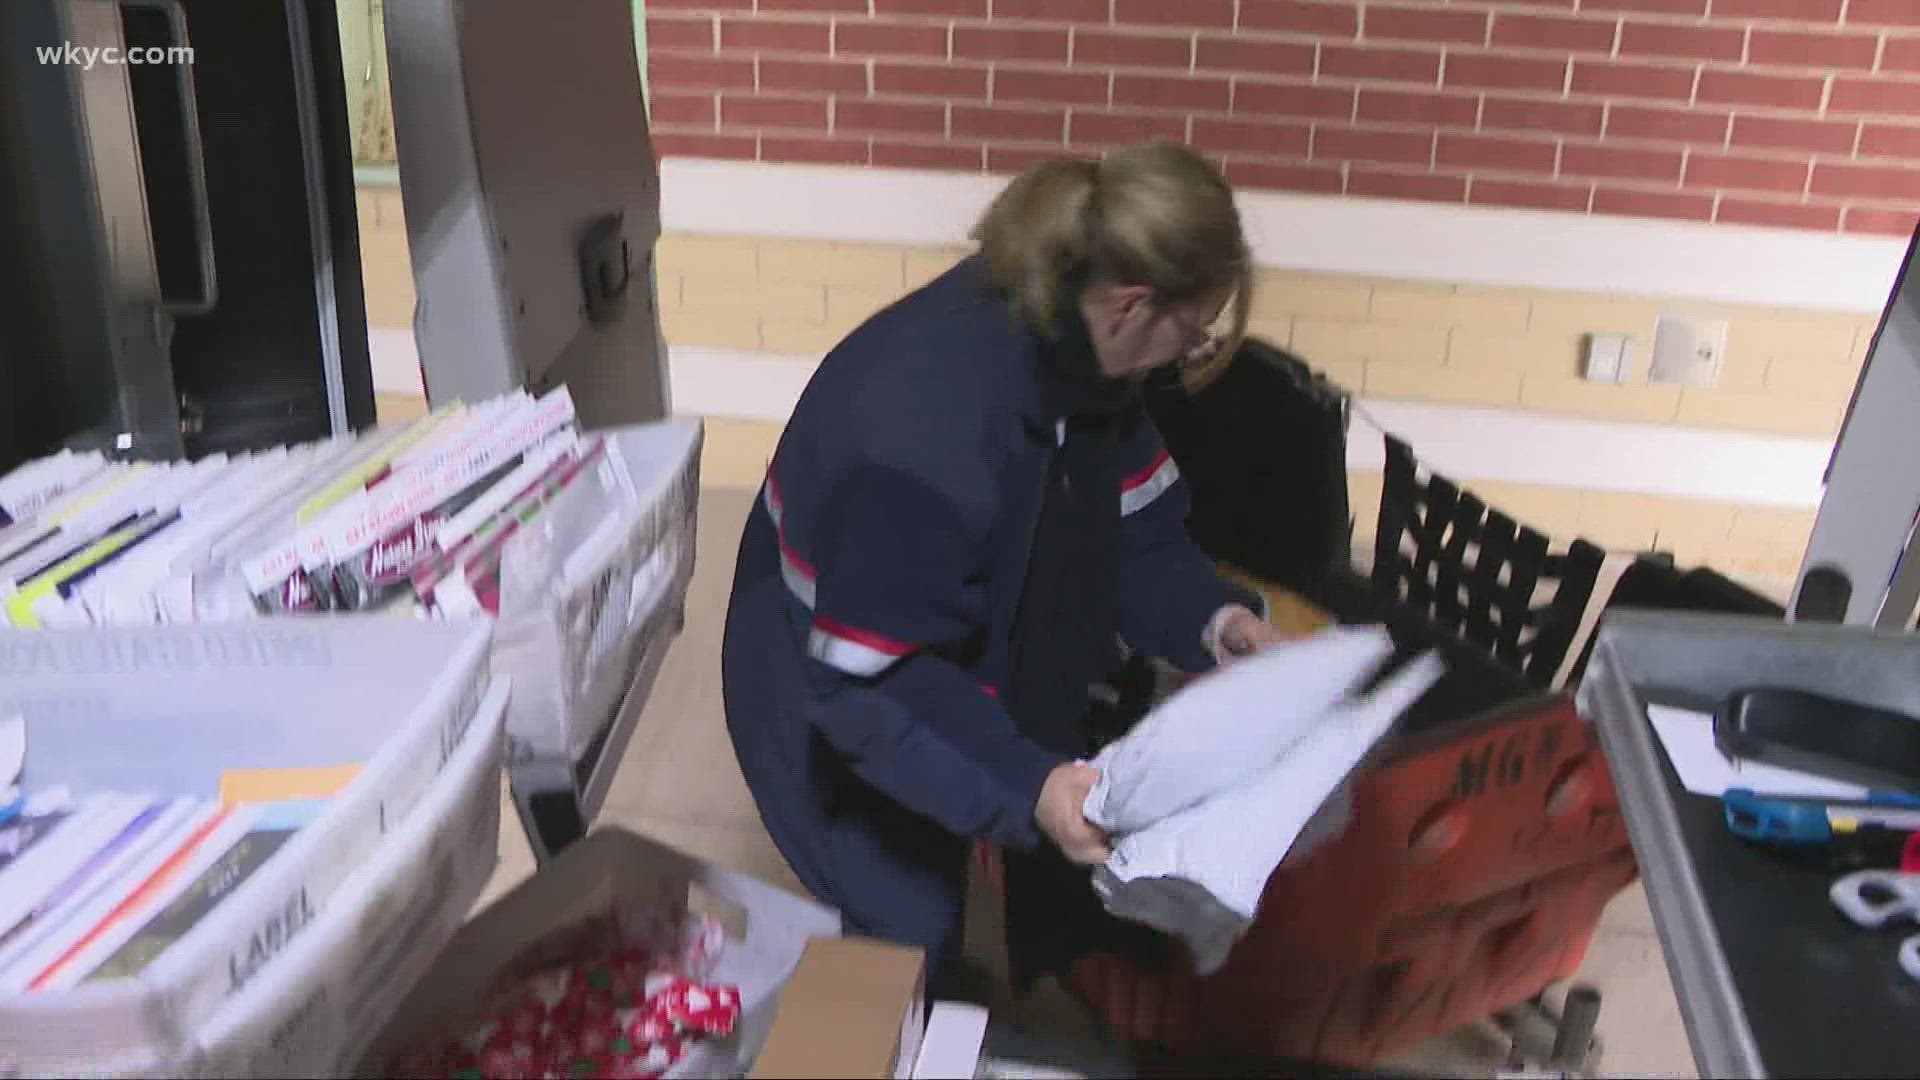 The postal service anticipates up to 950 million packages will be delivered this holiday season. More than 12 billion letters, cards, and boxes will be sent out.